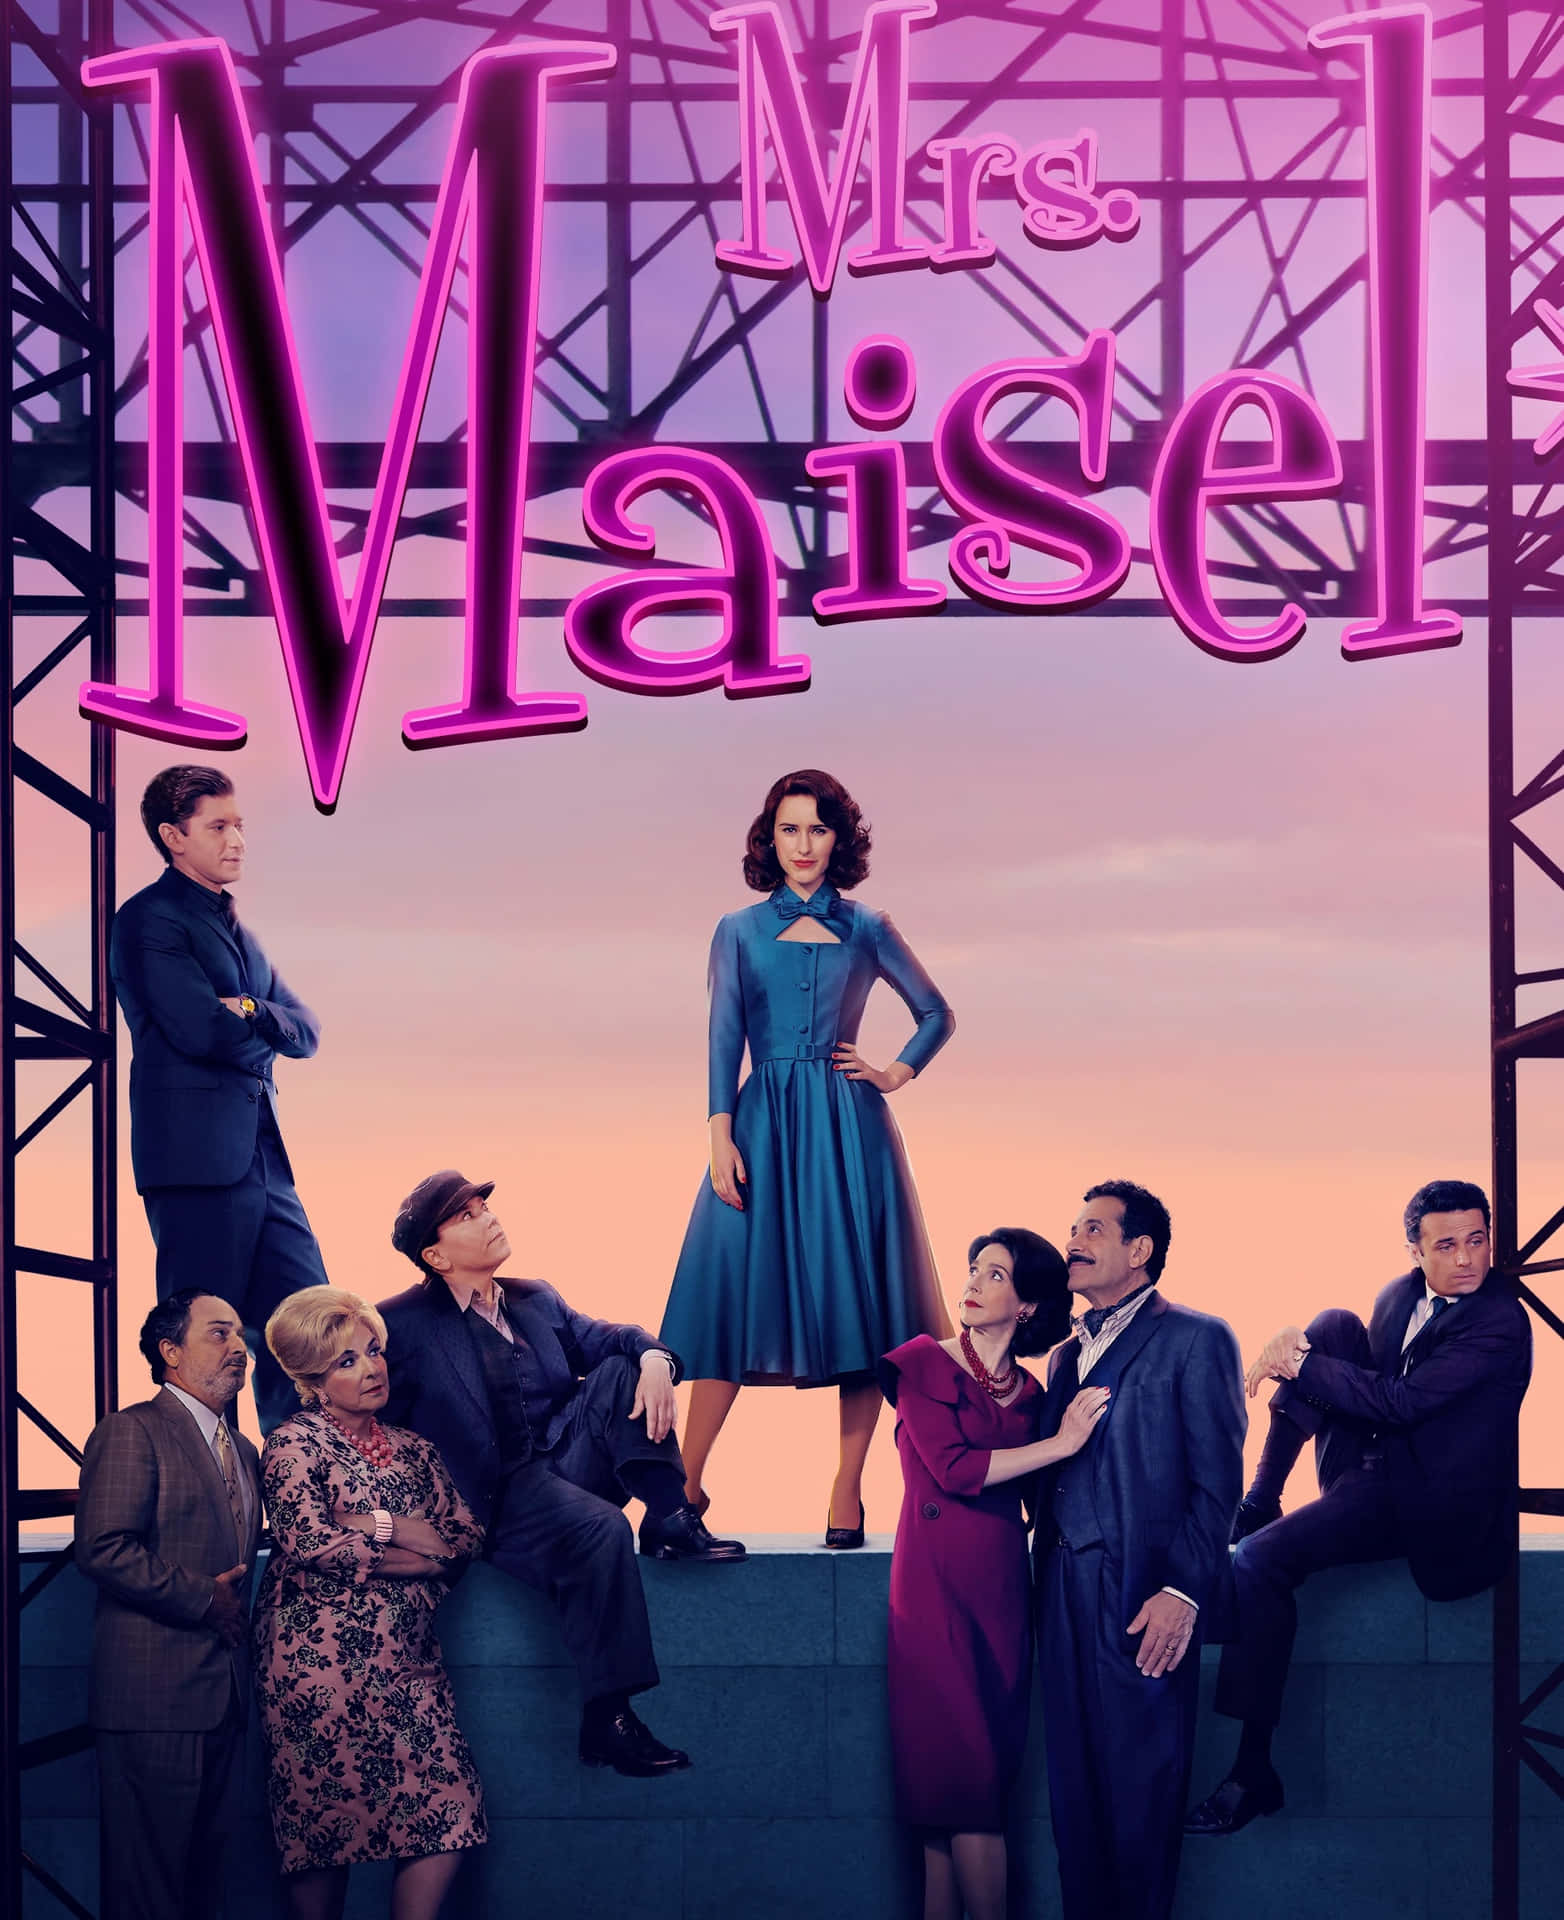 Midge Exudes Confidence On The Stage In The Marvelous Mrs Maisel Wallpaper